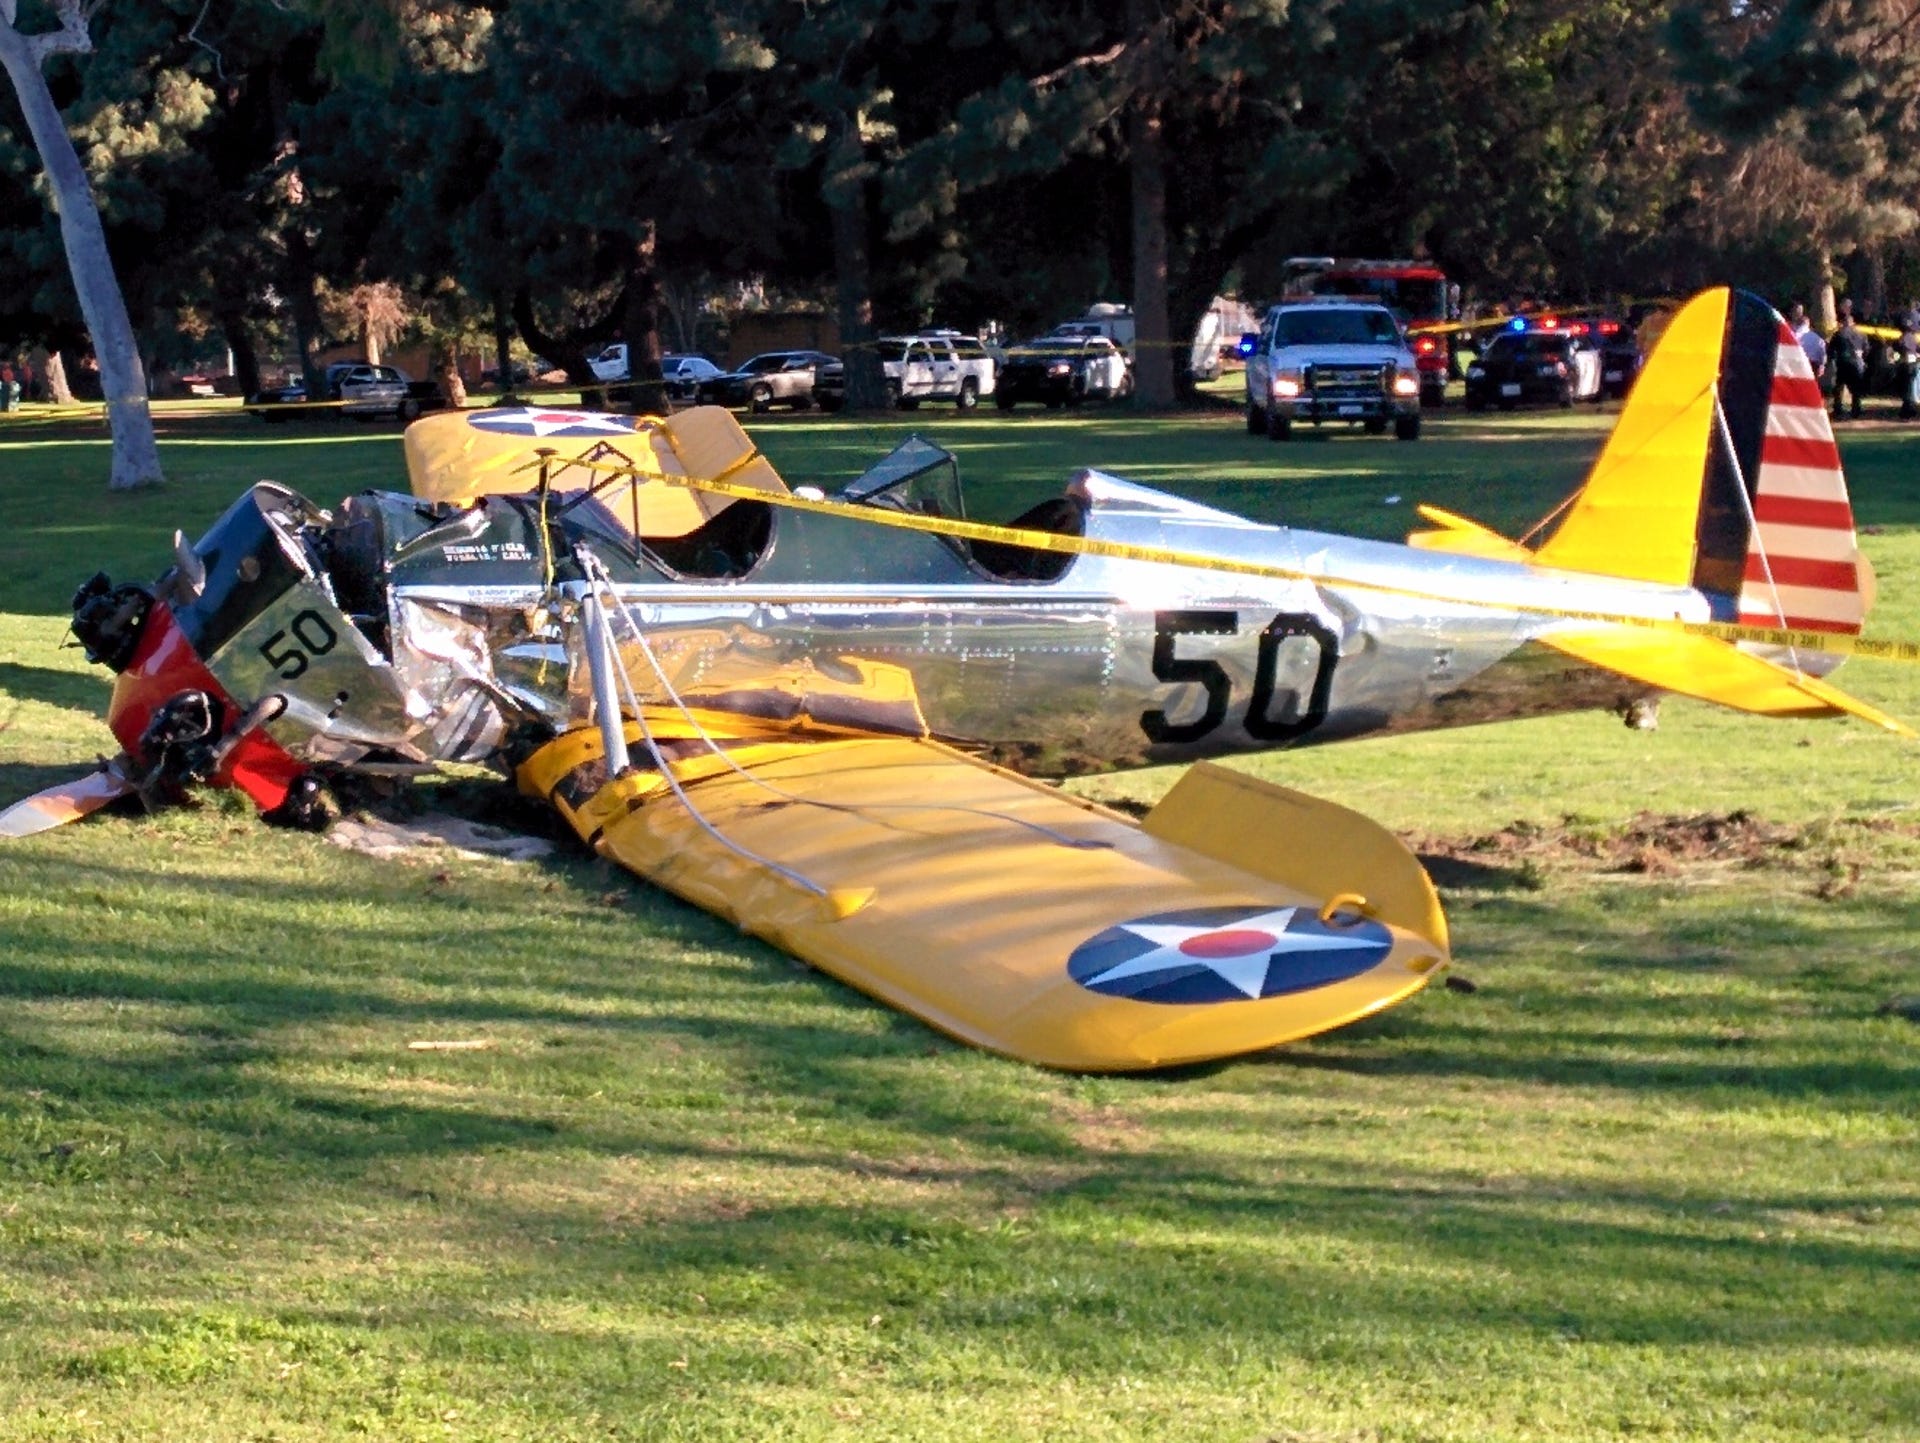 The single-engine airplane went down on the golf course